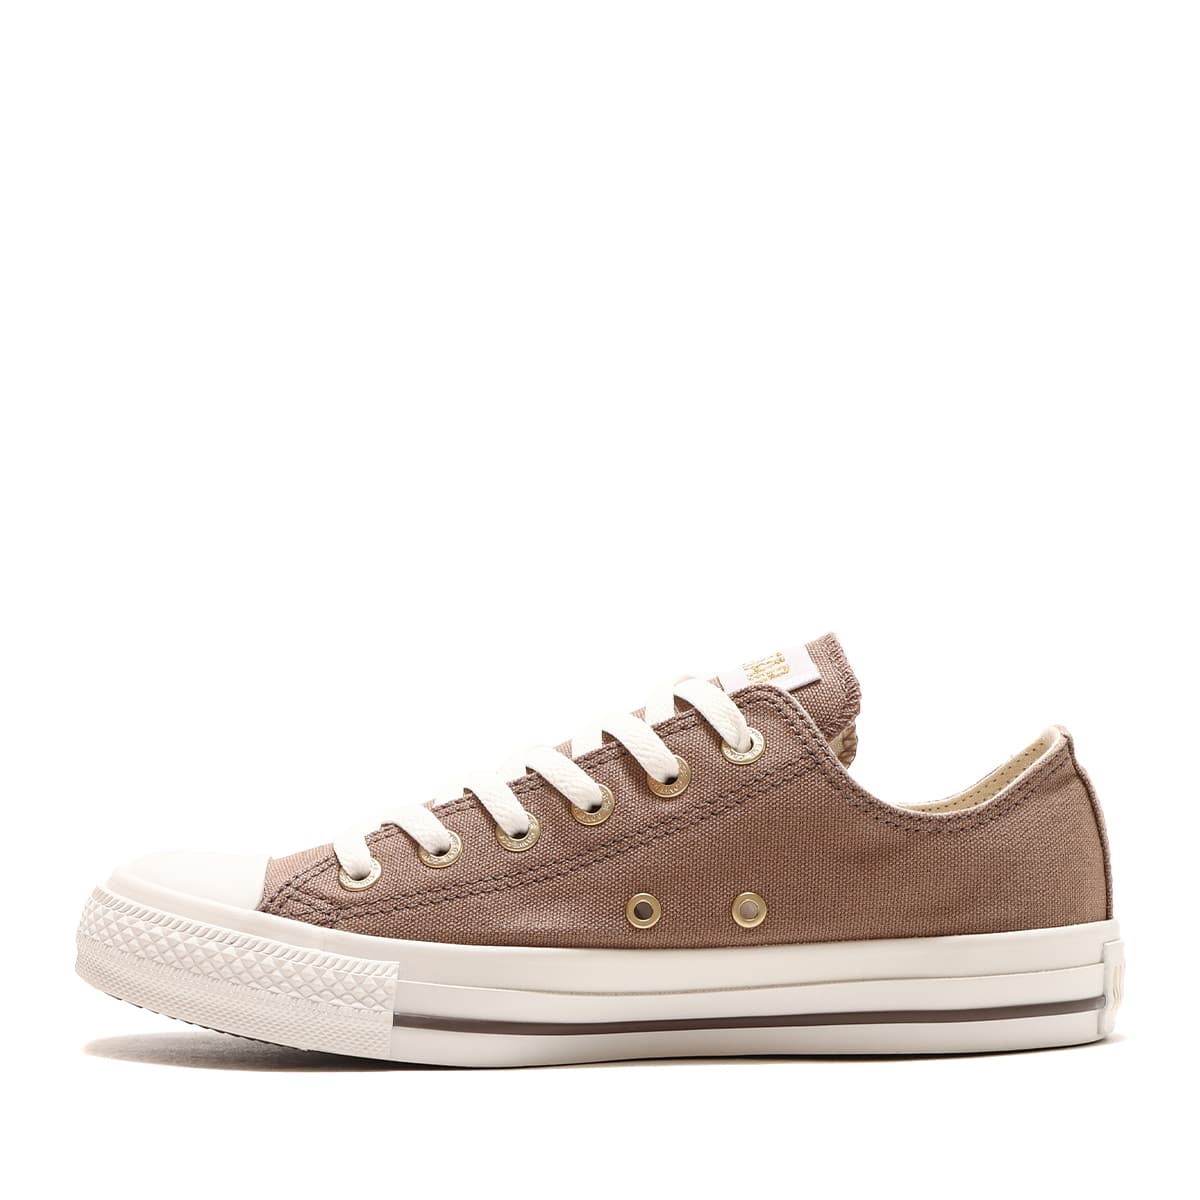 CONVERSE ALL STAR FLAT EYELETS CG OX TAUPE 23SS-I